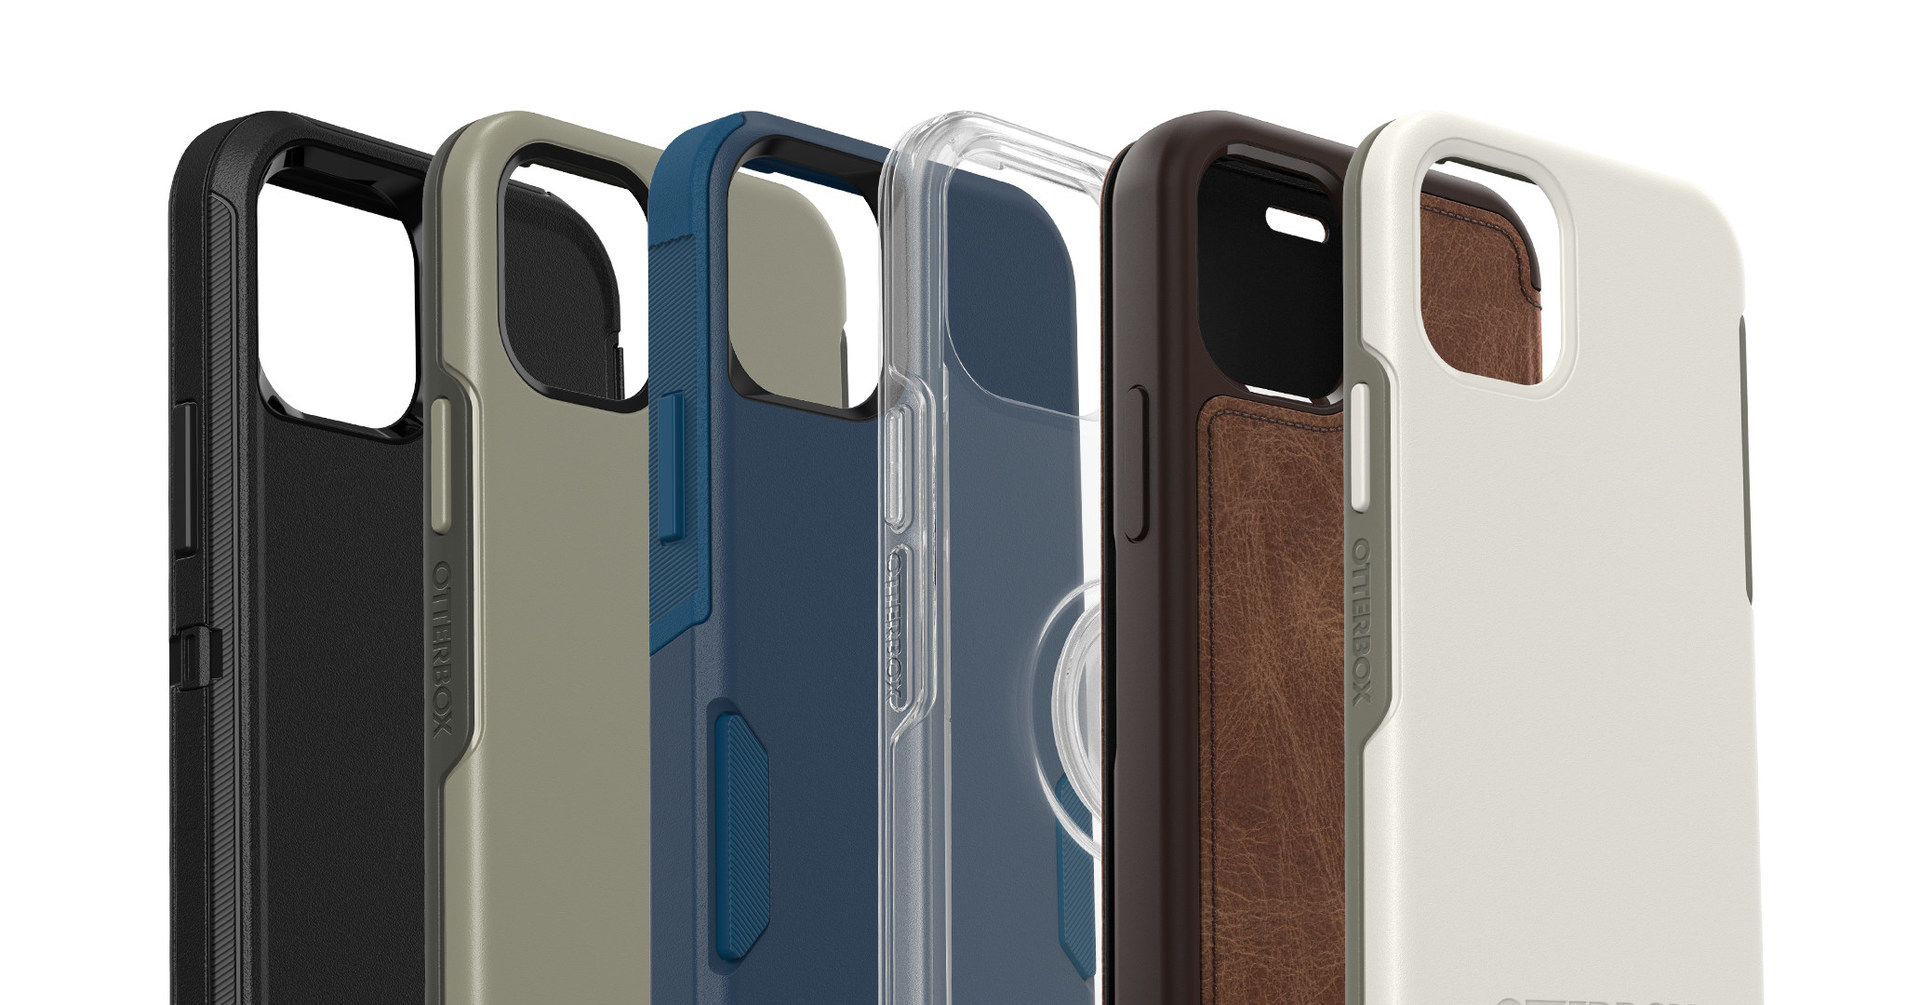 Get Your Otterbox Case For The New Apple Iphone 12 Models And A Chance To Give Back Now